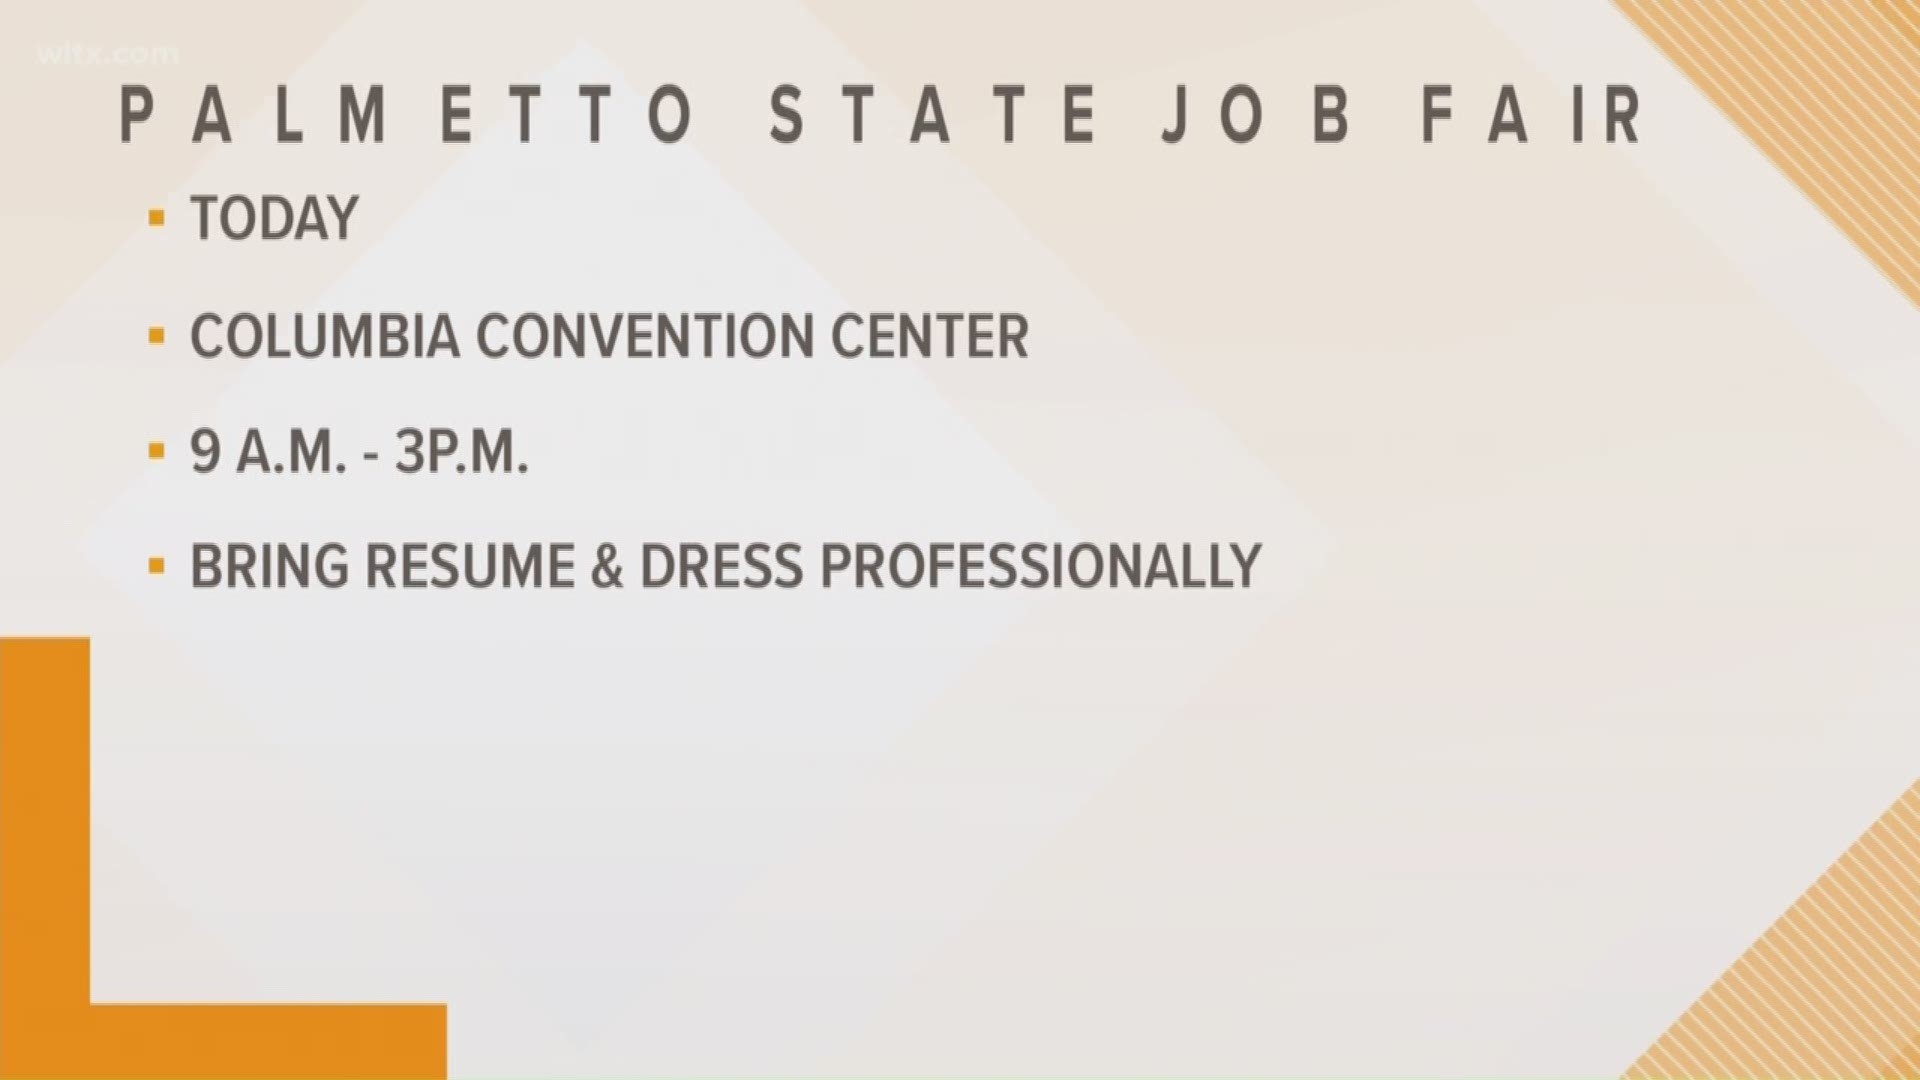 South Carolina's largest professional job fair is happening Tuesday at the Columbia Convention Center.